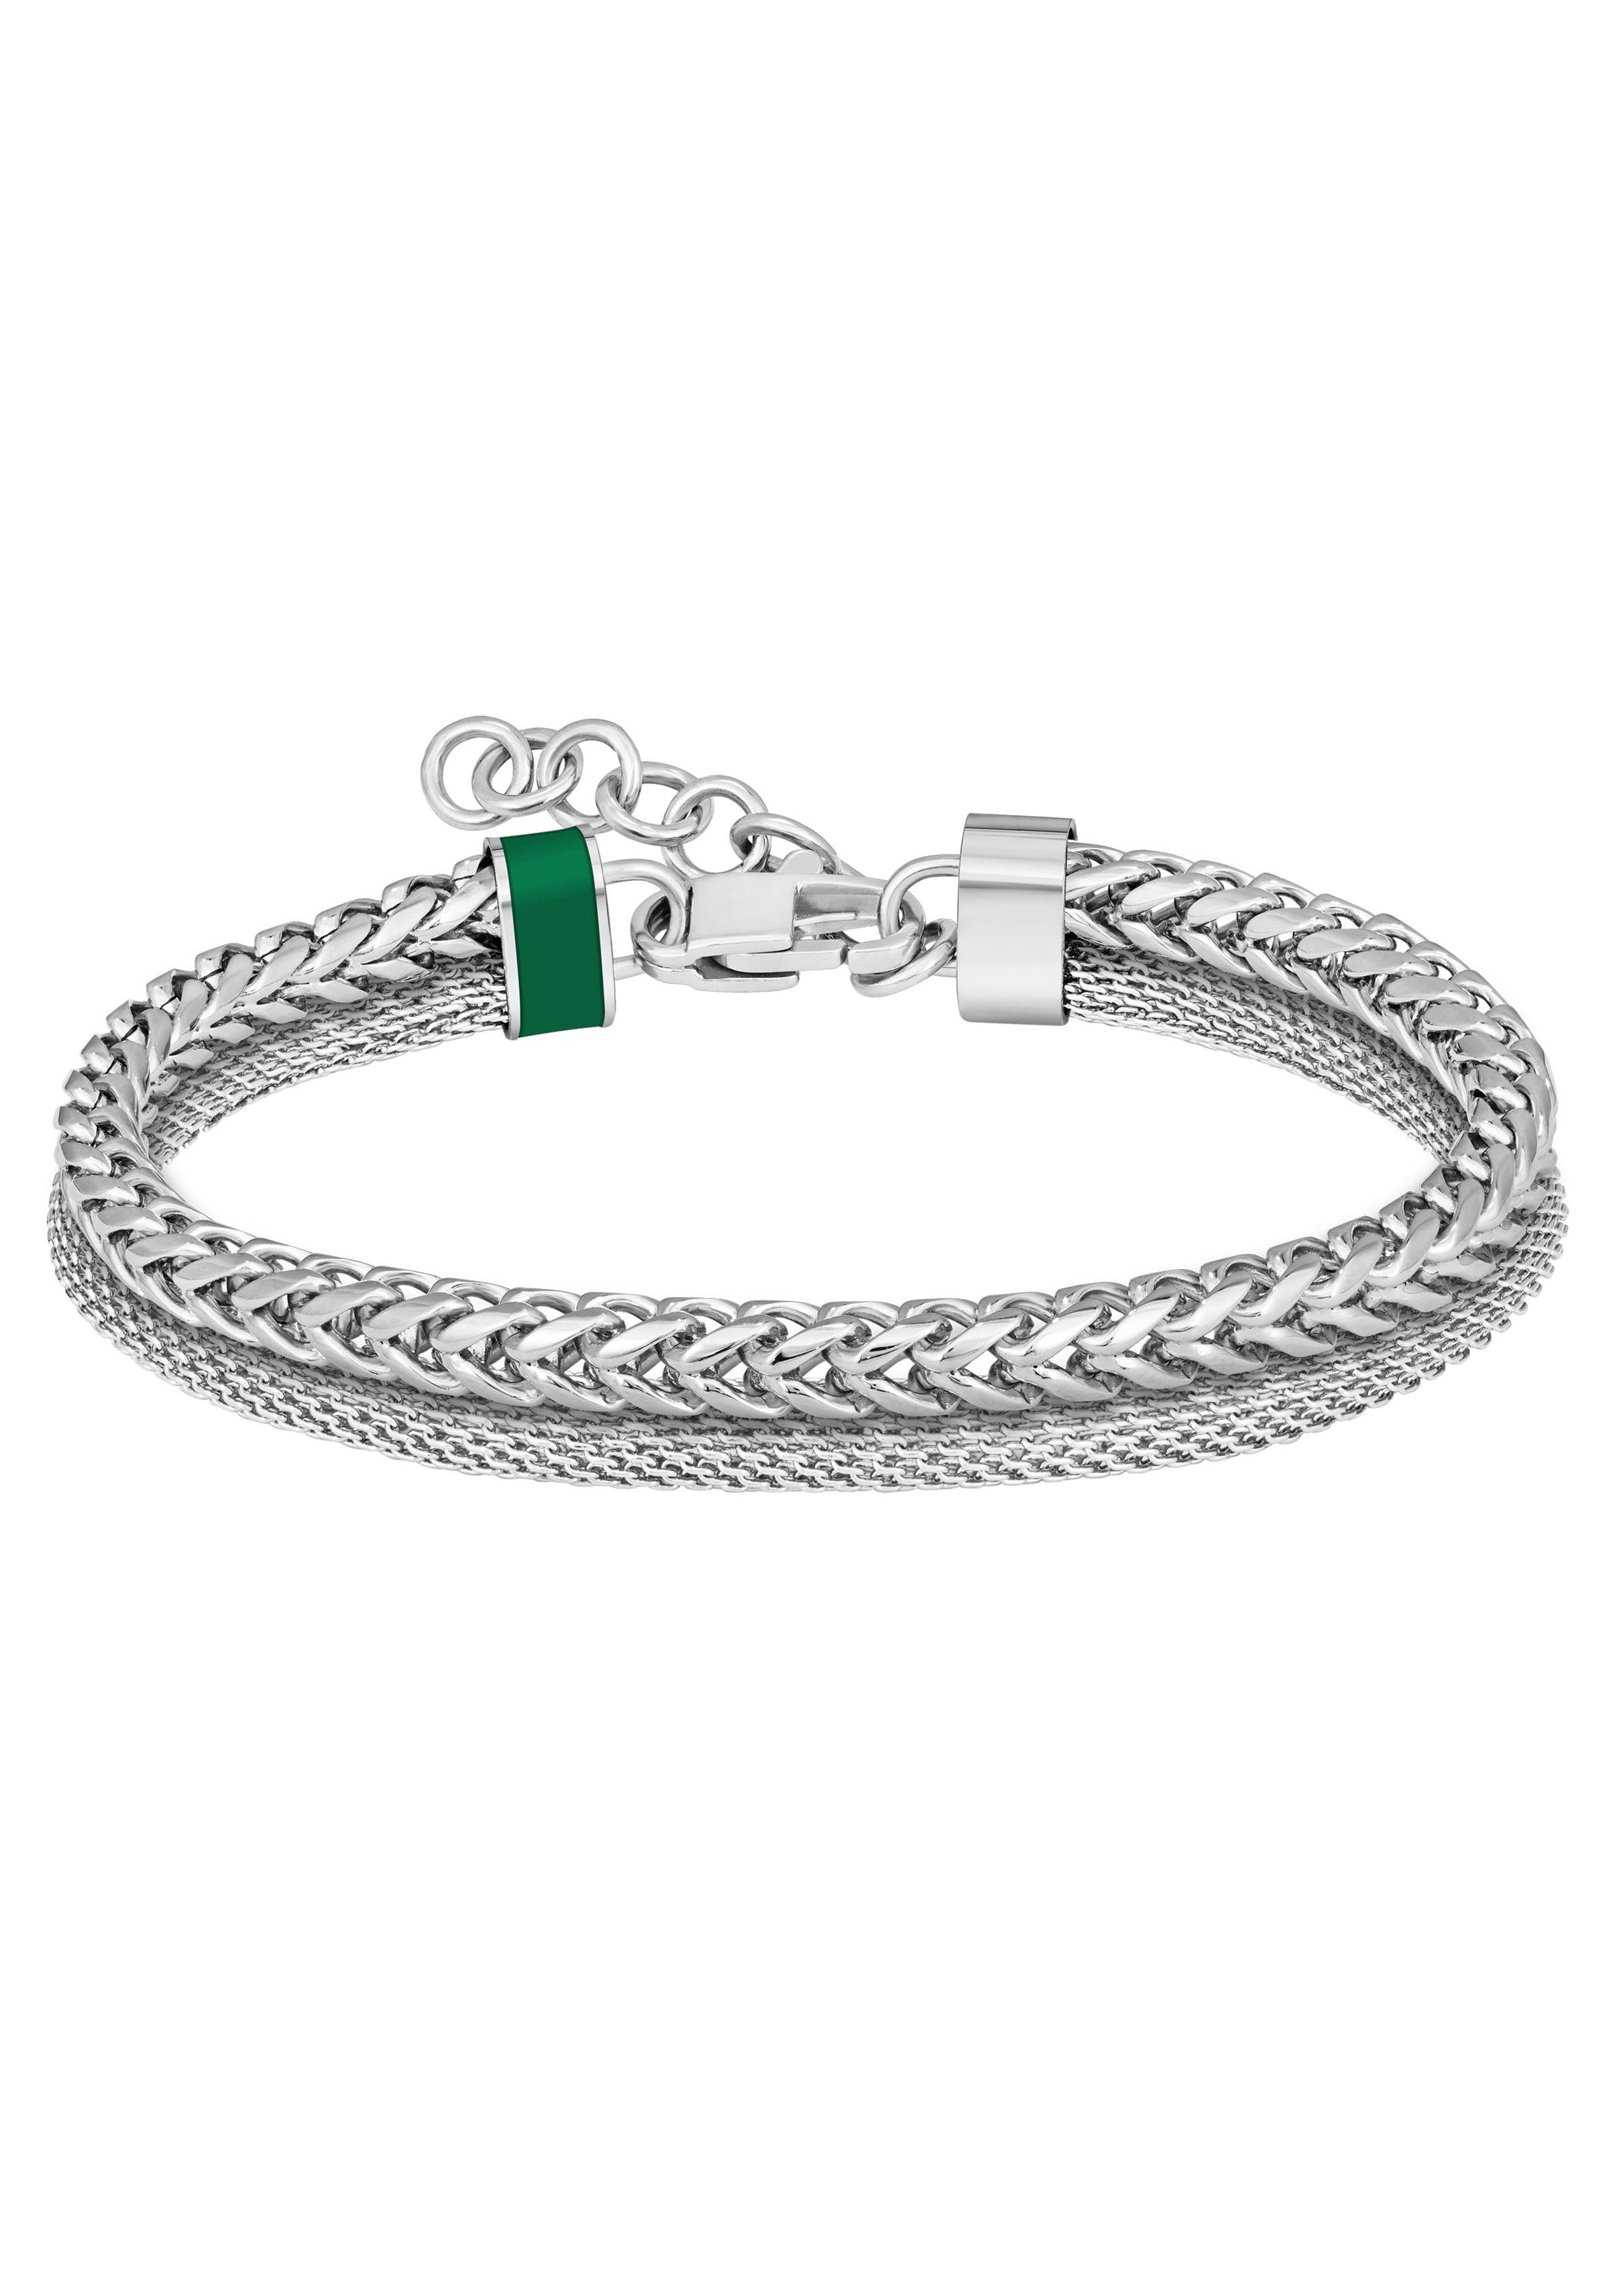 Lacoste Armband ONO, 2040242, mit Emaille